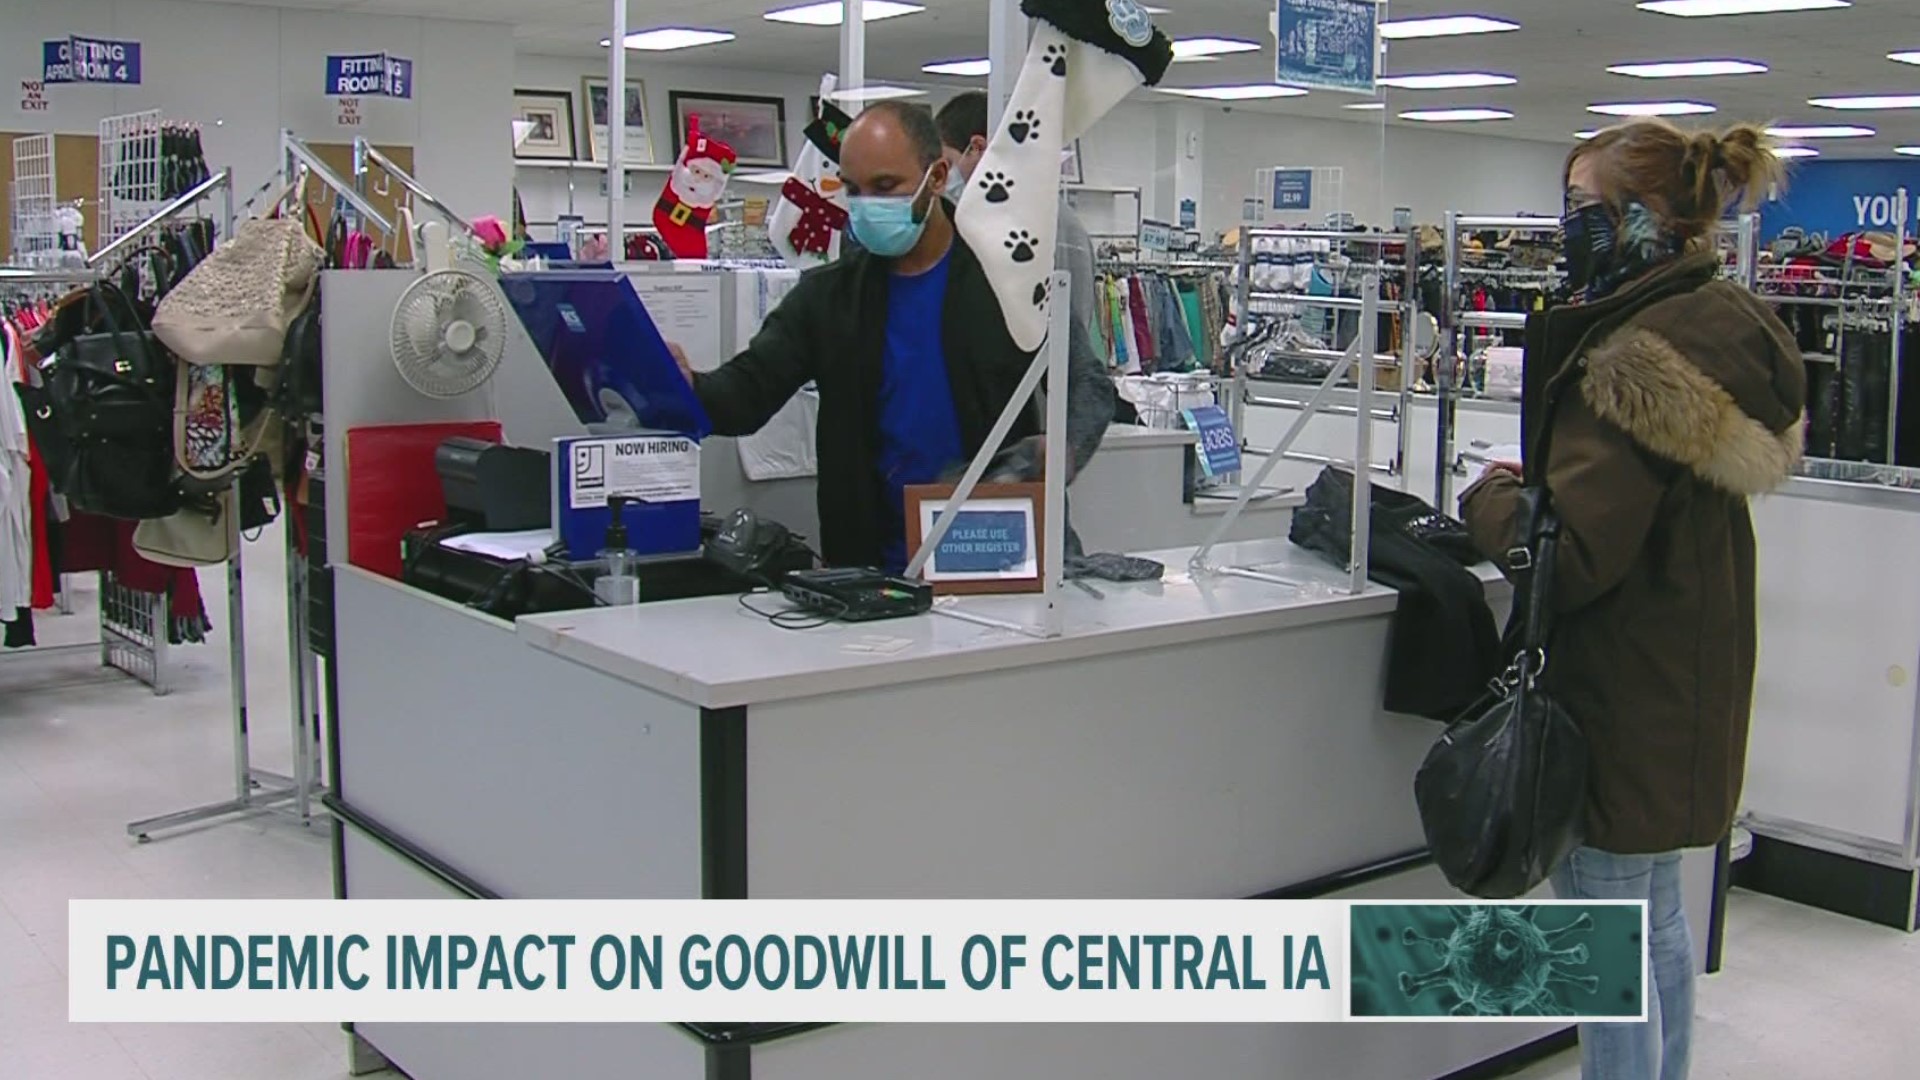 "Our mission is to put people back to work and take down barriers to employment," Goodwill of Central Iowa President & CEO Mary Hunter said.